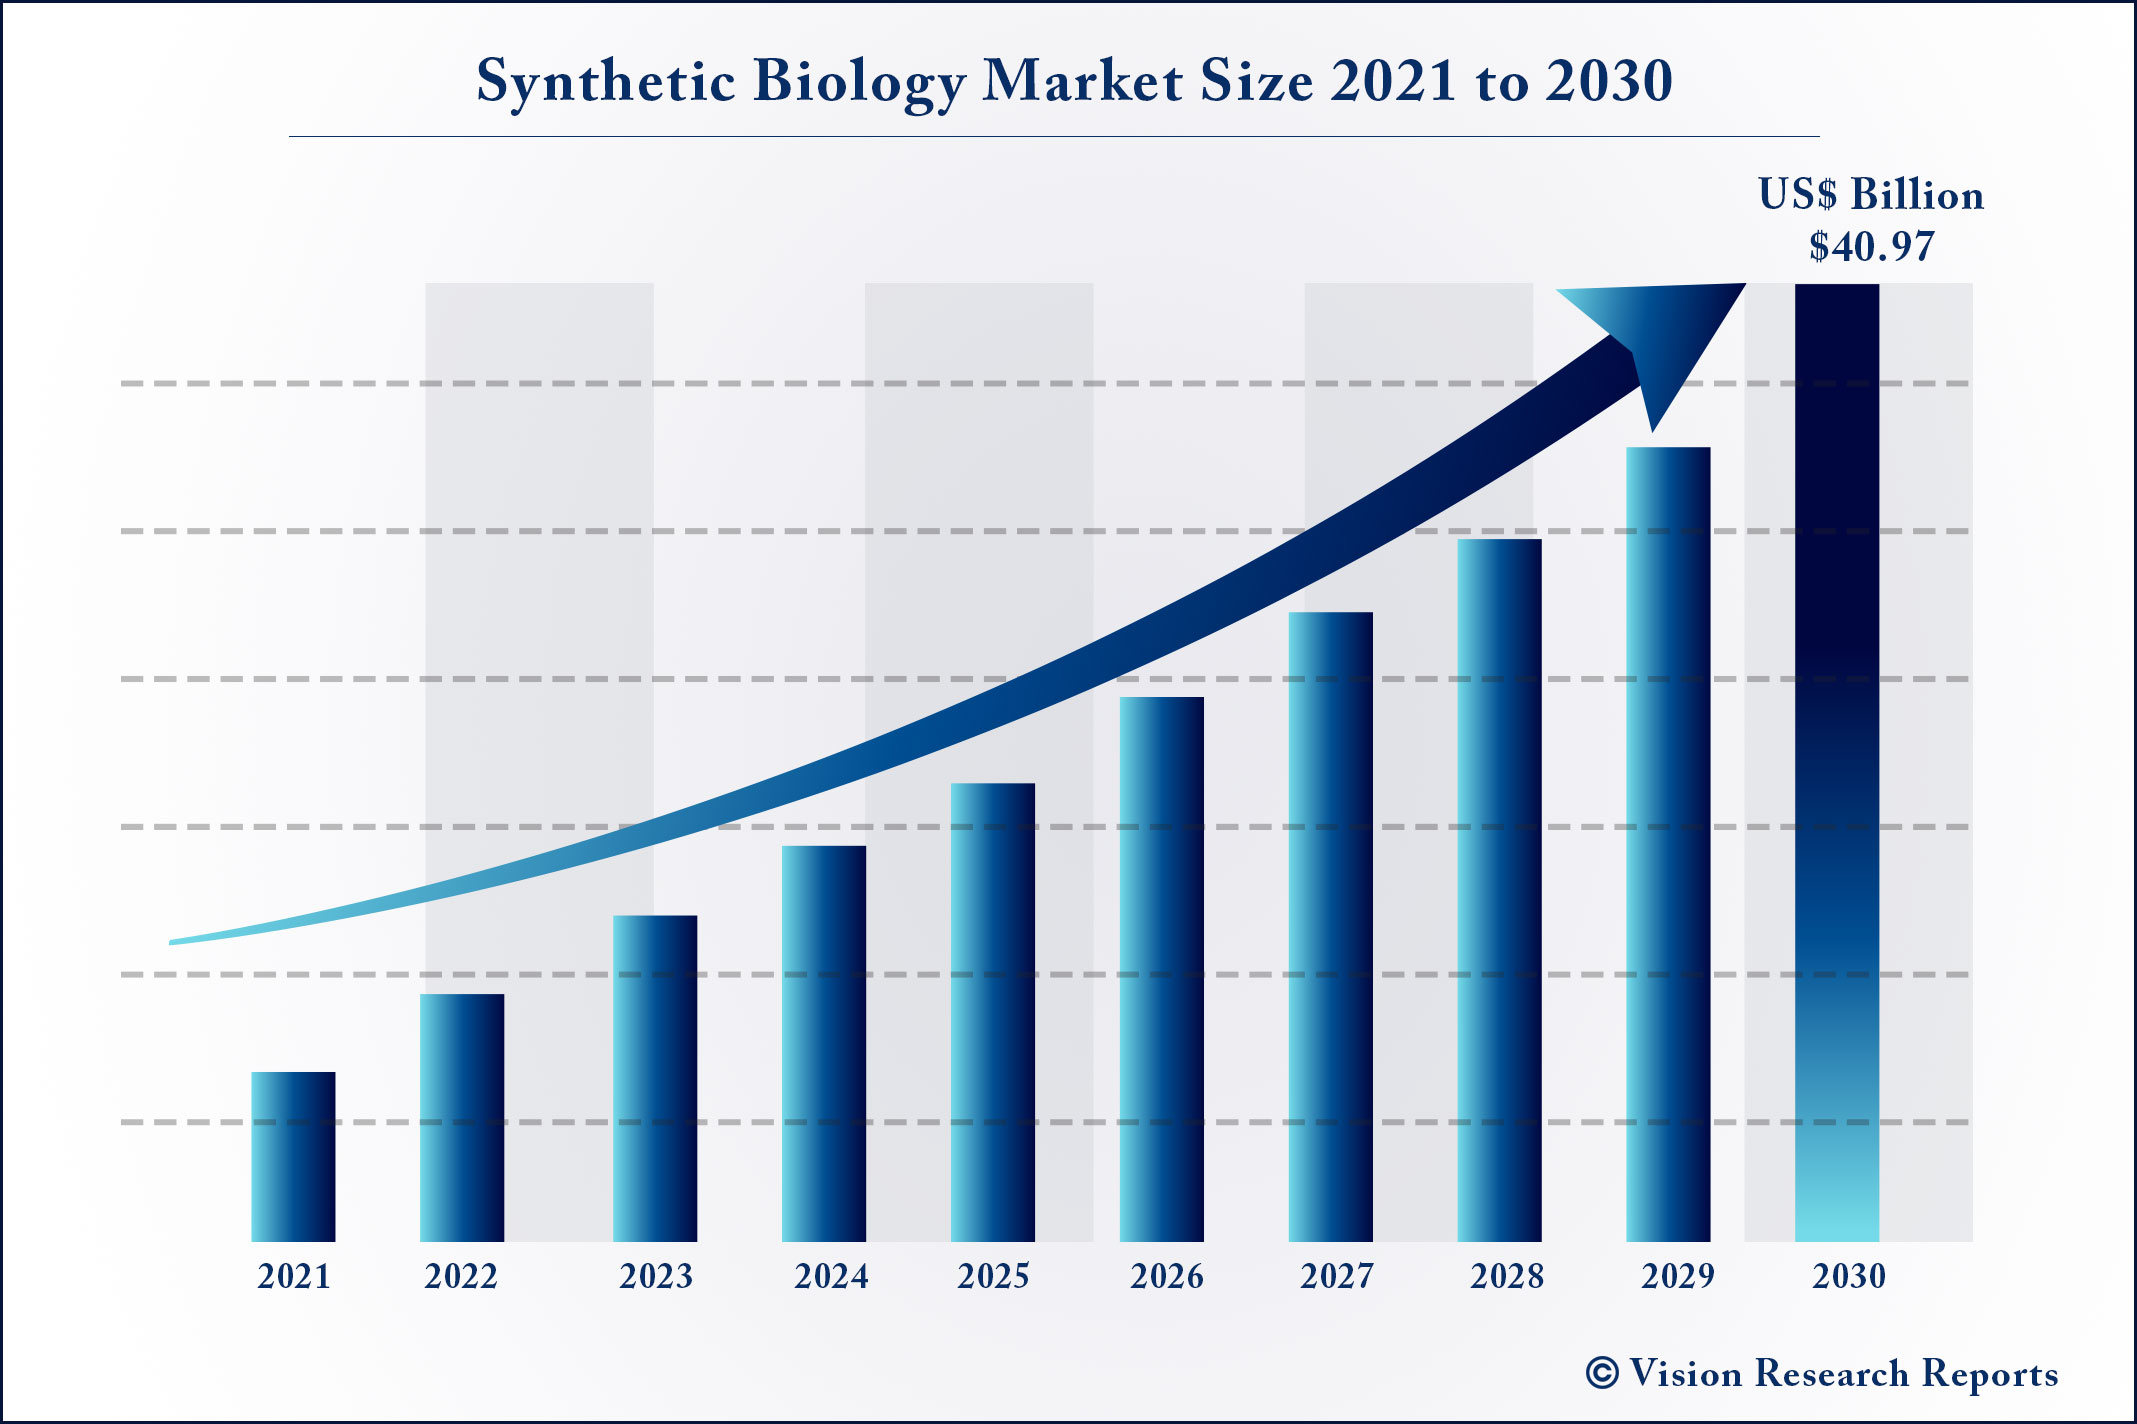 Synthetic Biology Market Size 2021 to 2030